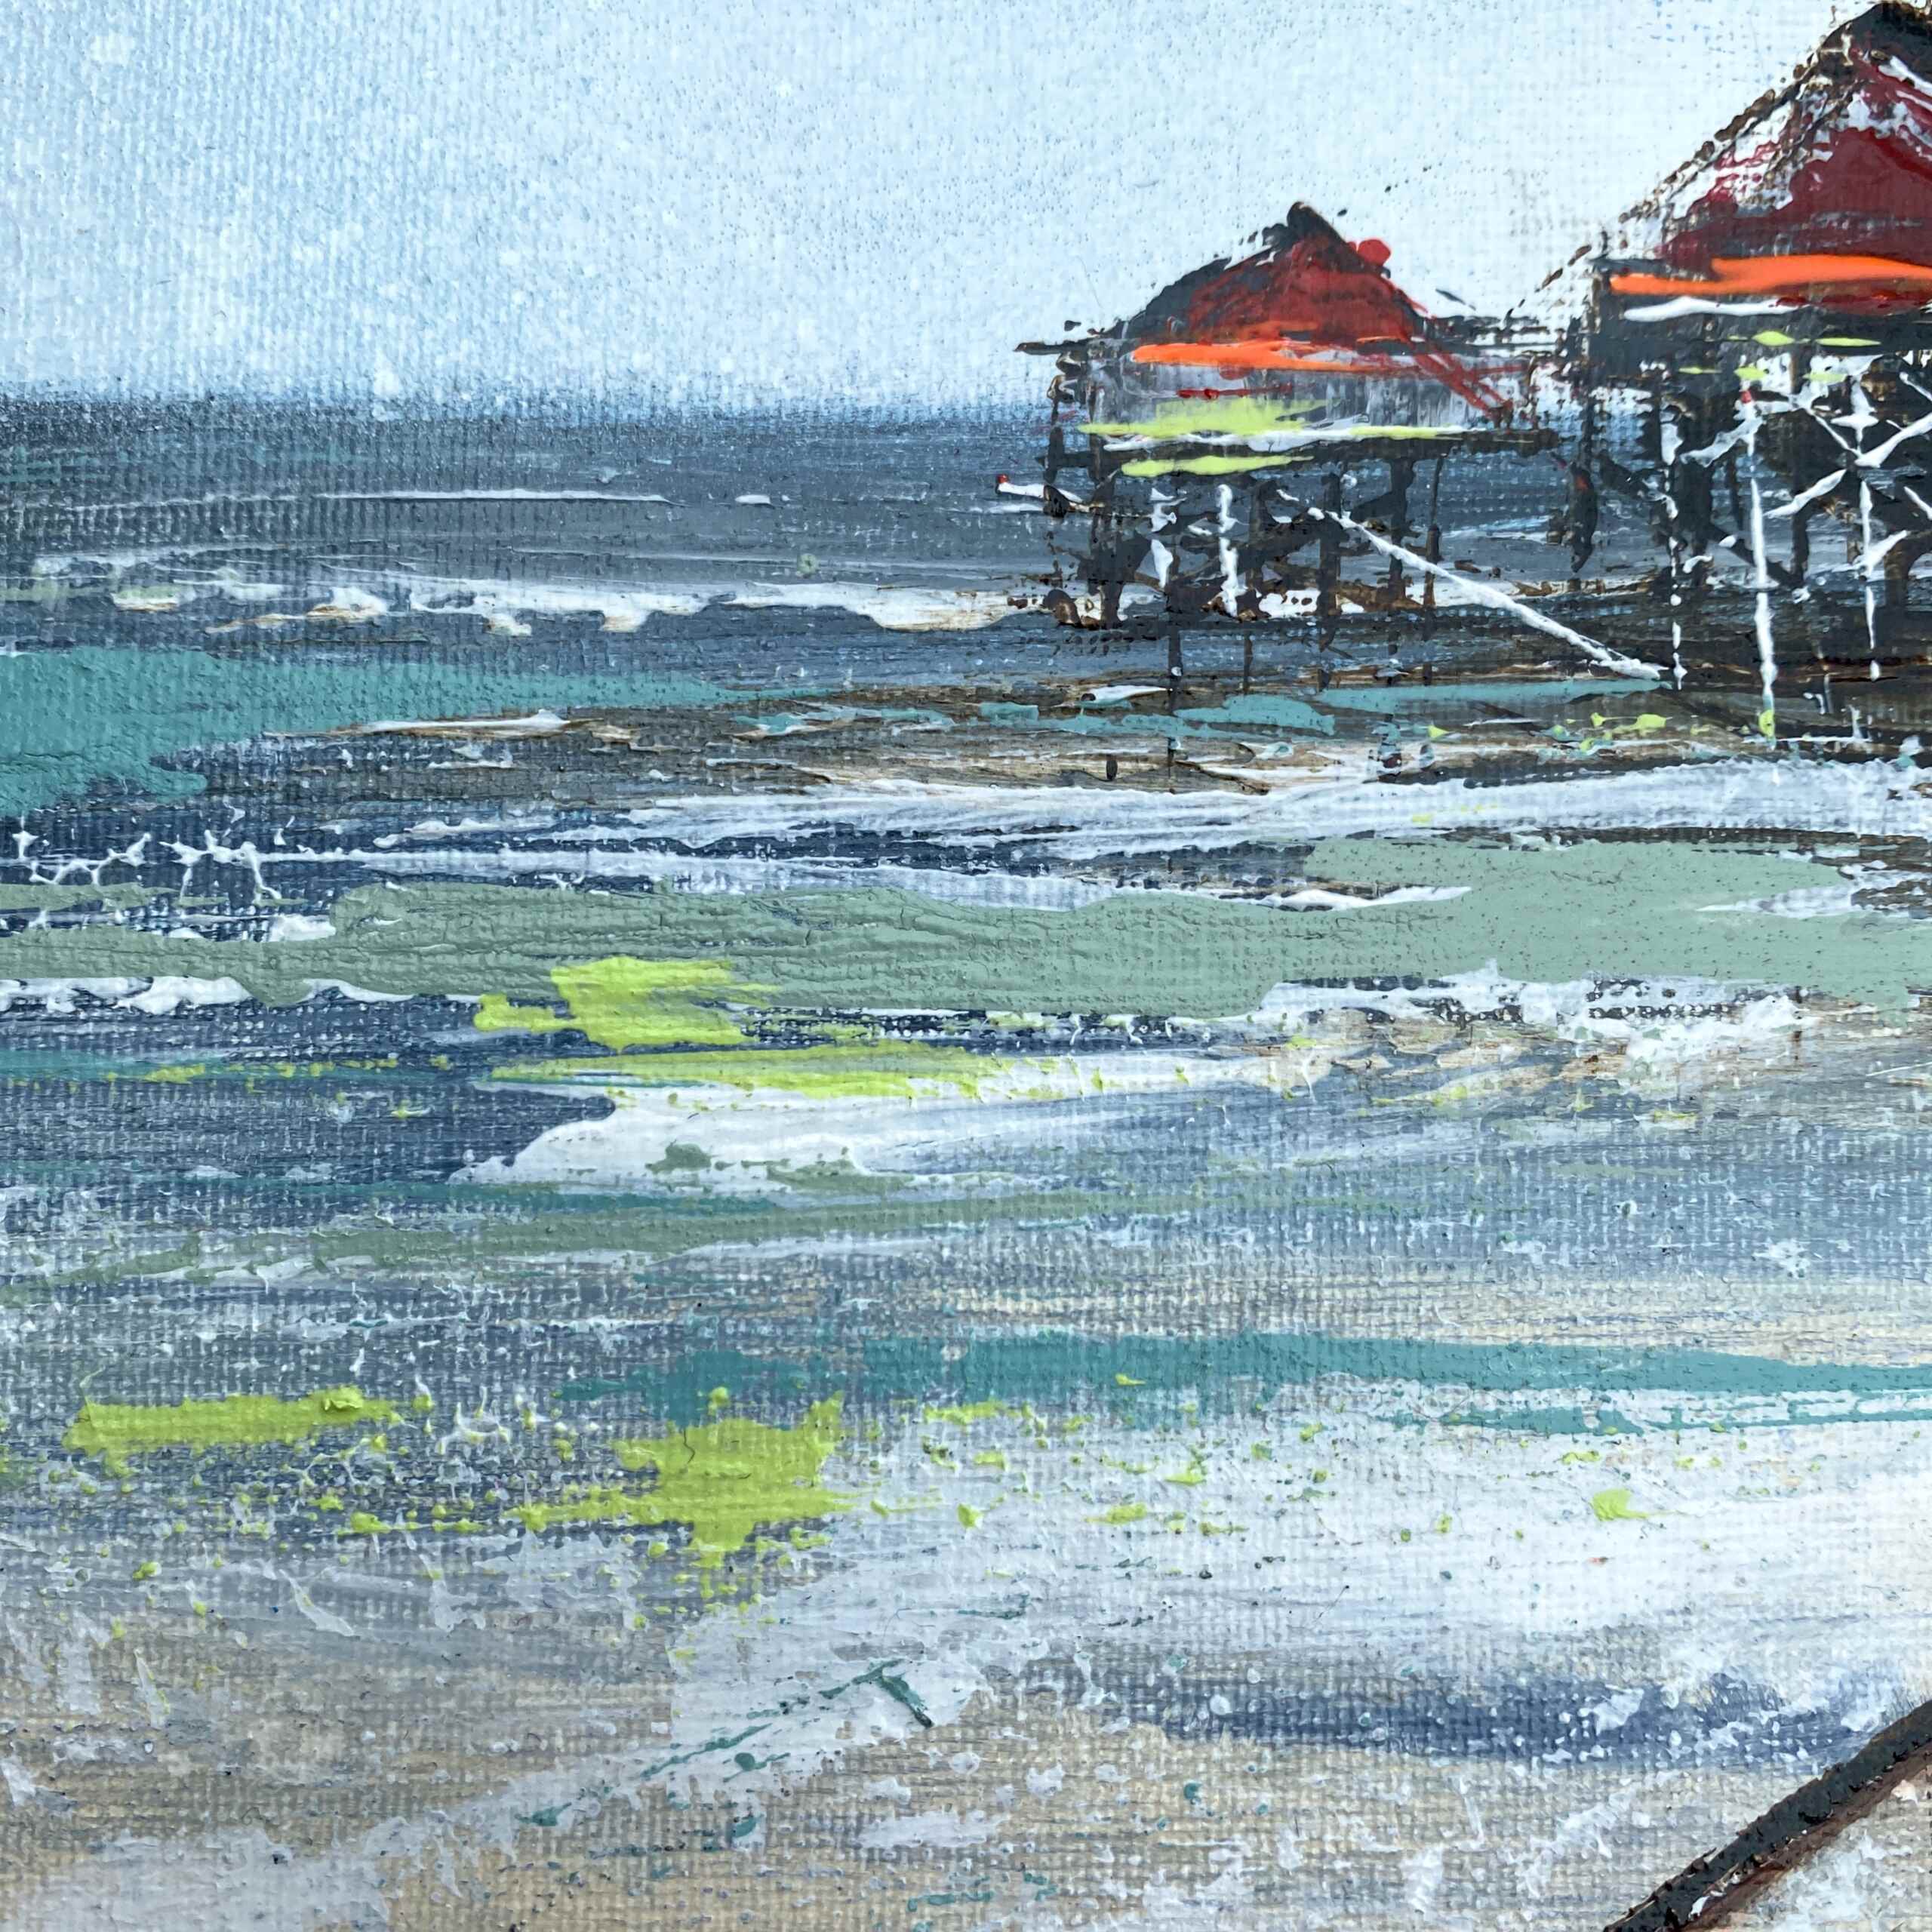 Detail of artwork "At Home by the Sea" by Nina Groth